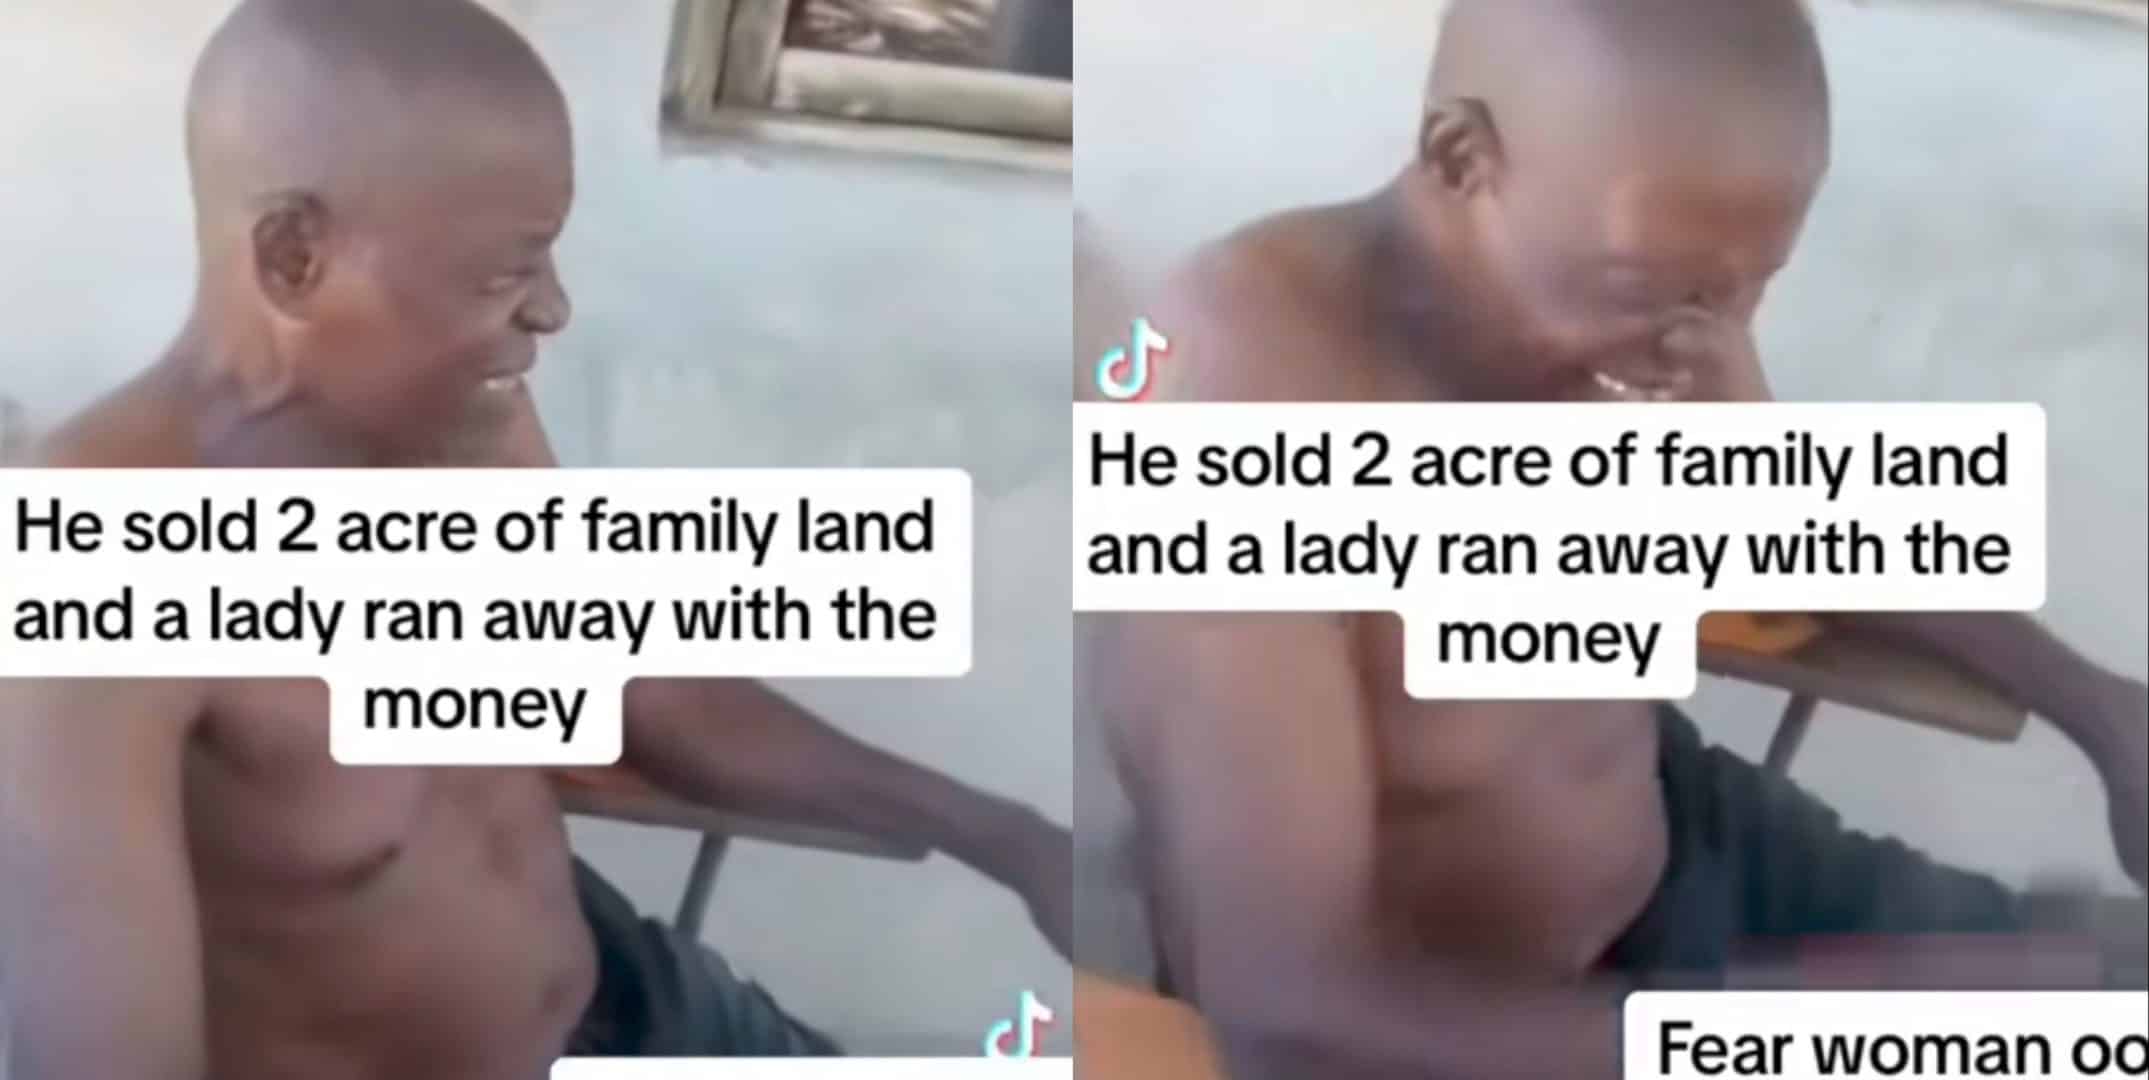 Man sells 2 acre of family land and runs with side chick, only for her to flee with all his money